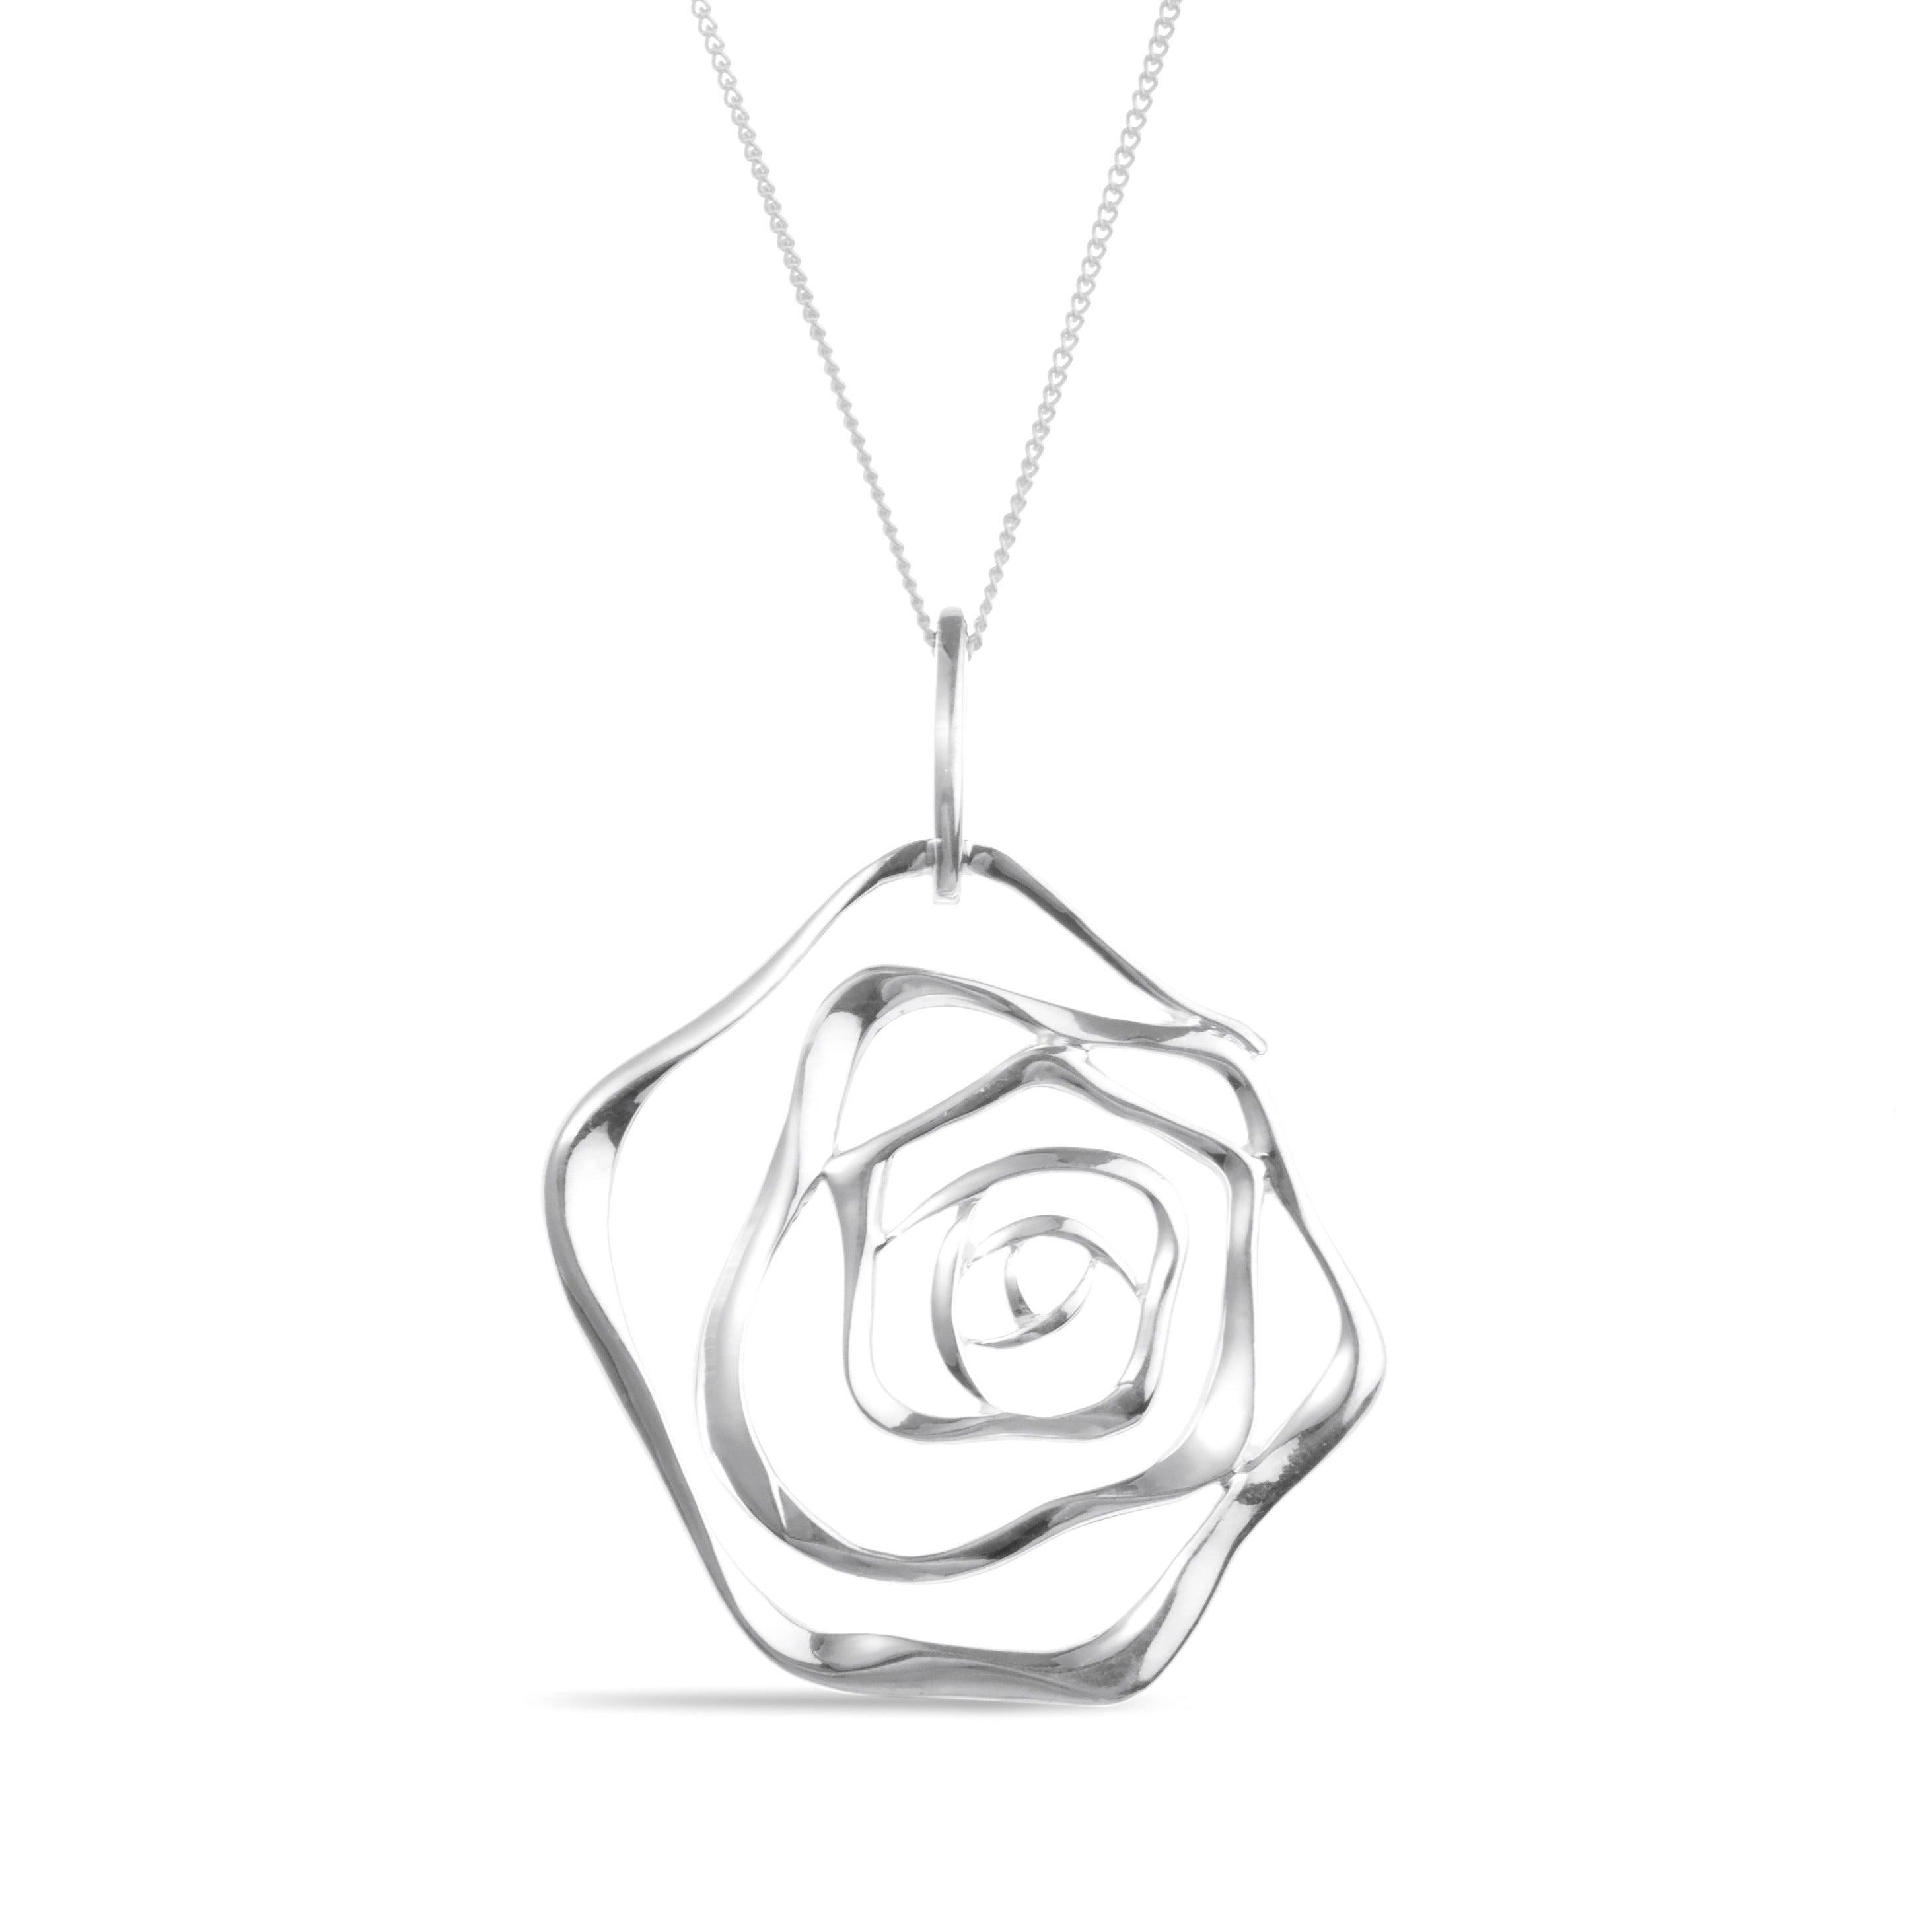 Silver Rose Pendent